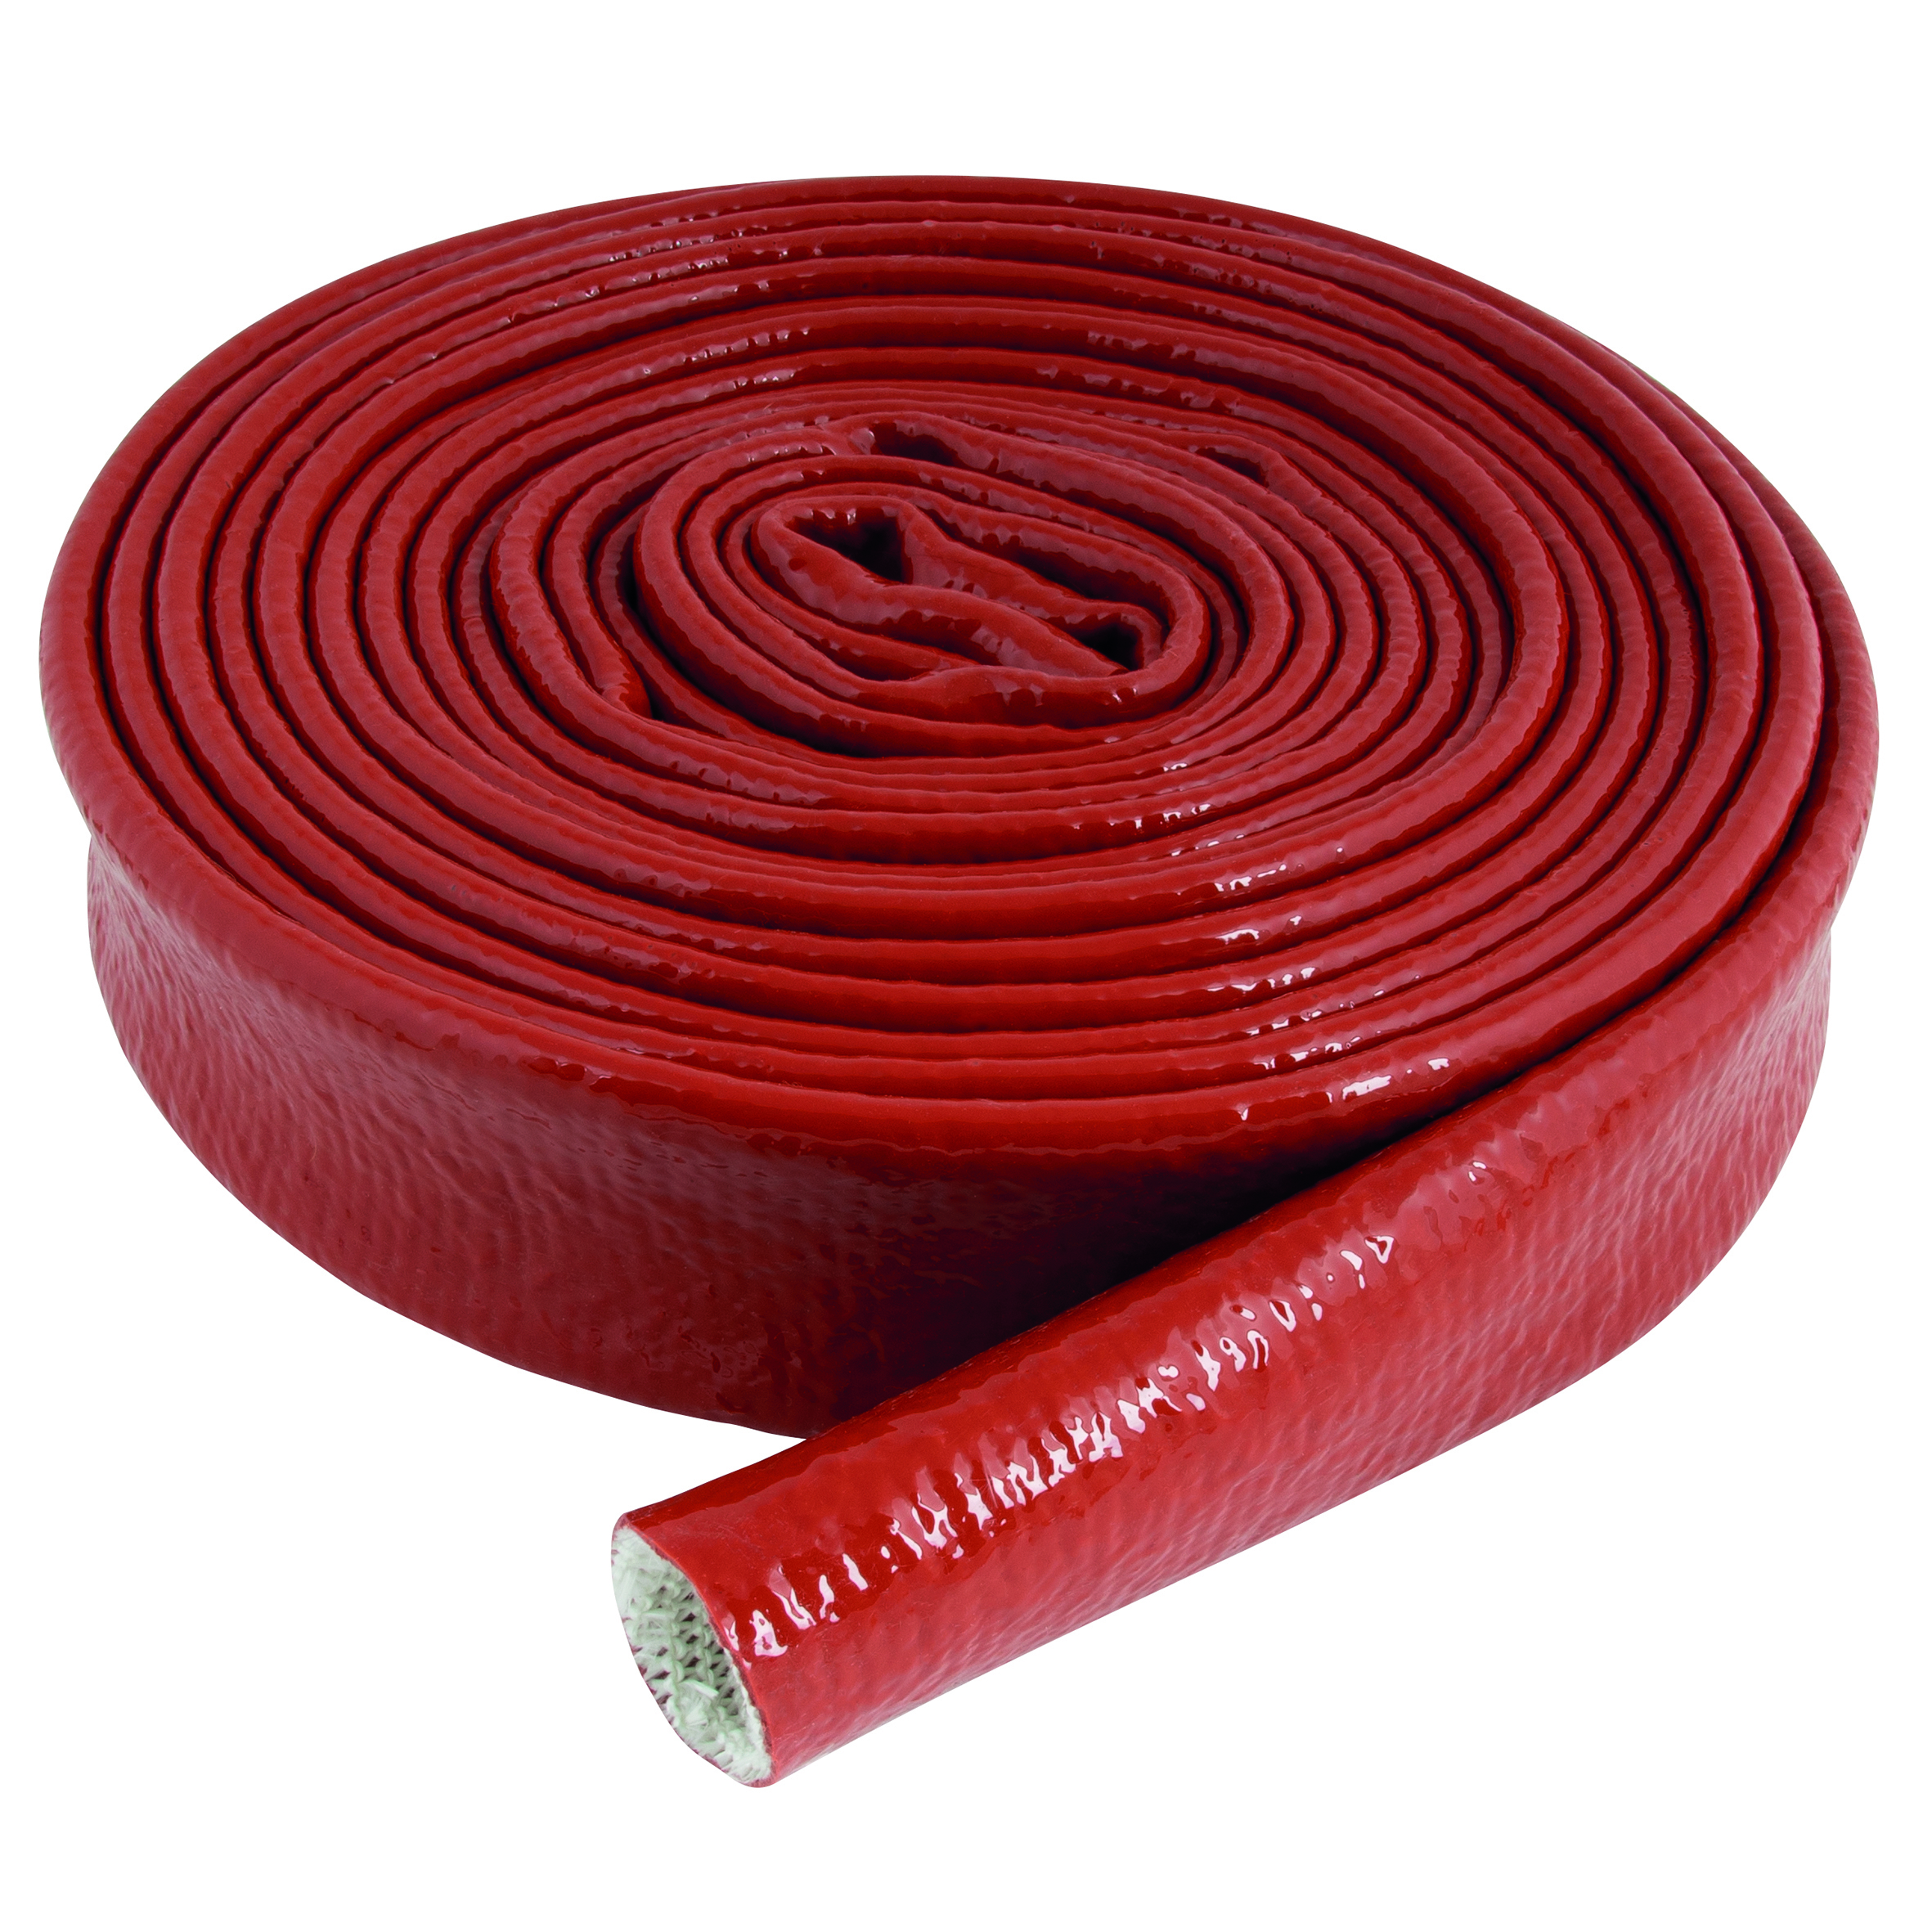 41MM ID RED COIL 15M FIRE SLEEVE